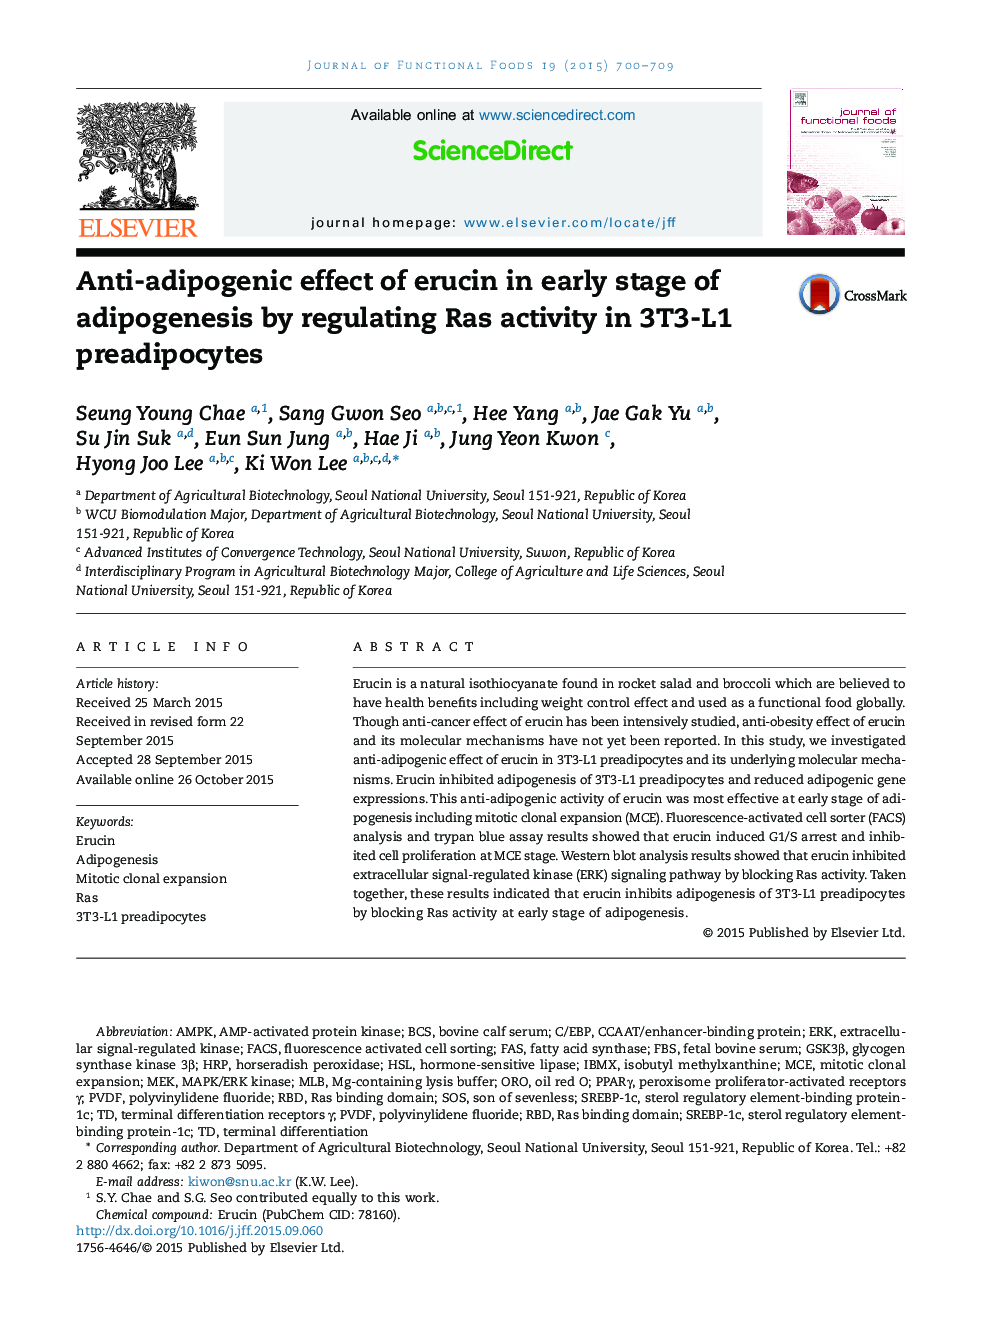 Anti-adipogenic effect of erucin in early stage of adipogenesis by regulating Ras activity in 3T3-L1 preadipocytes